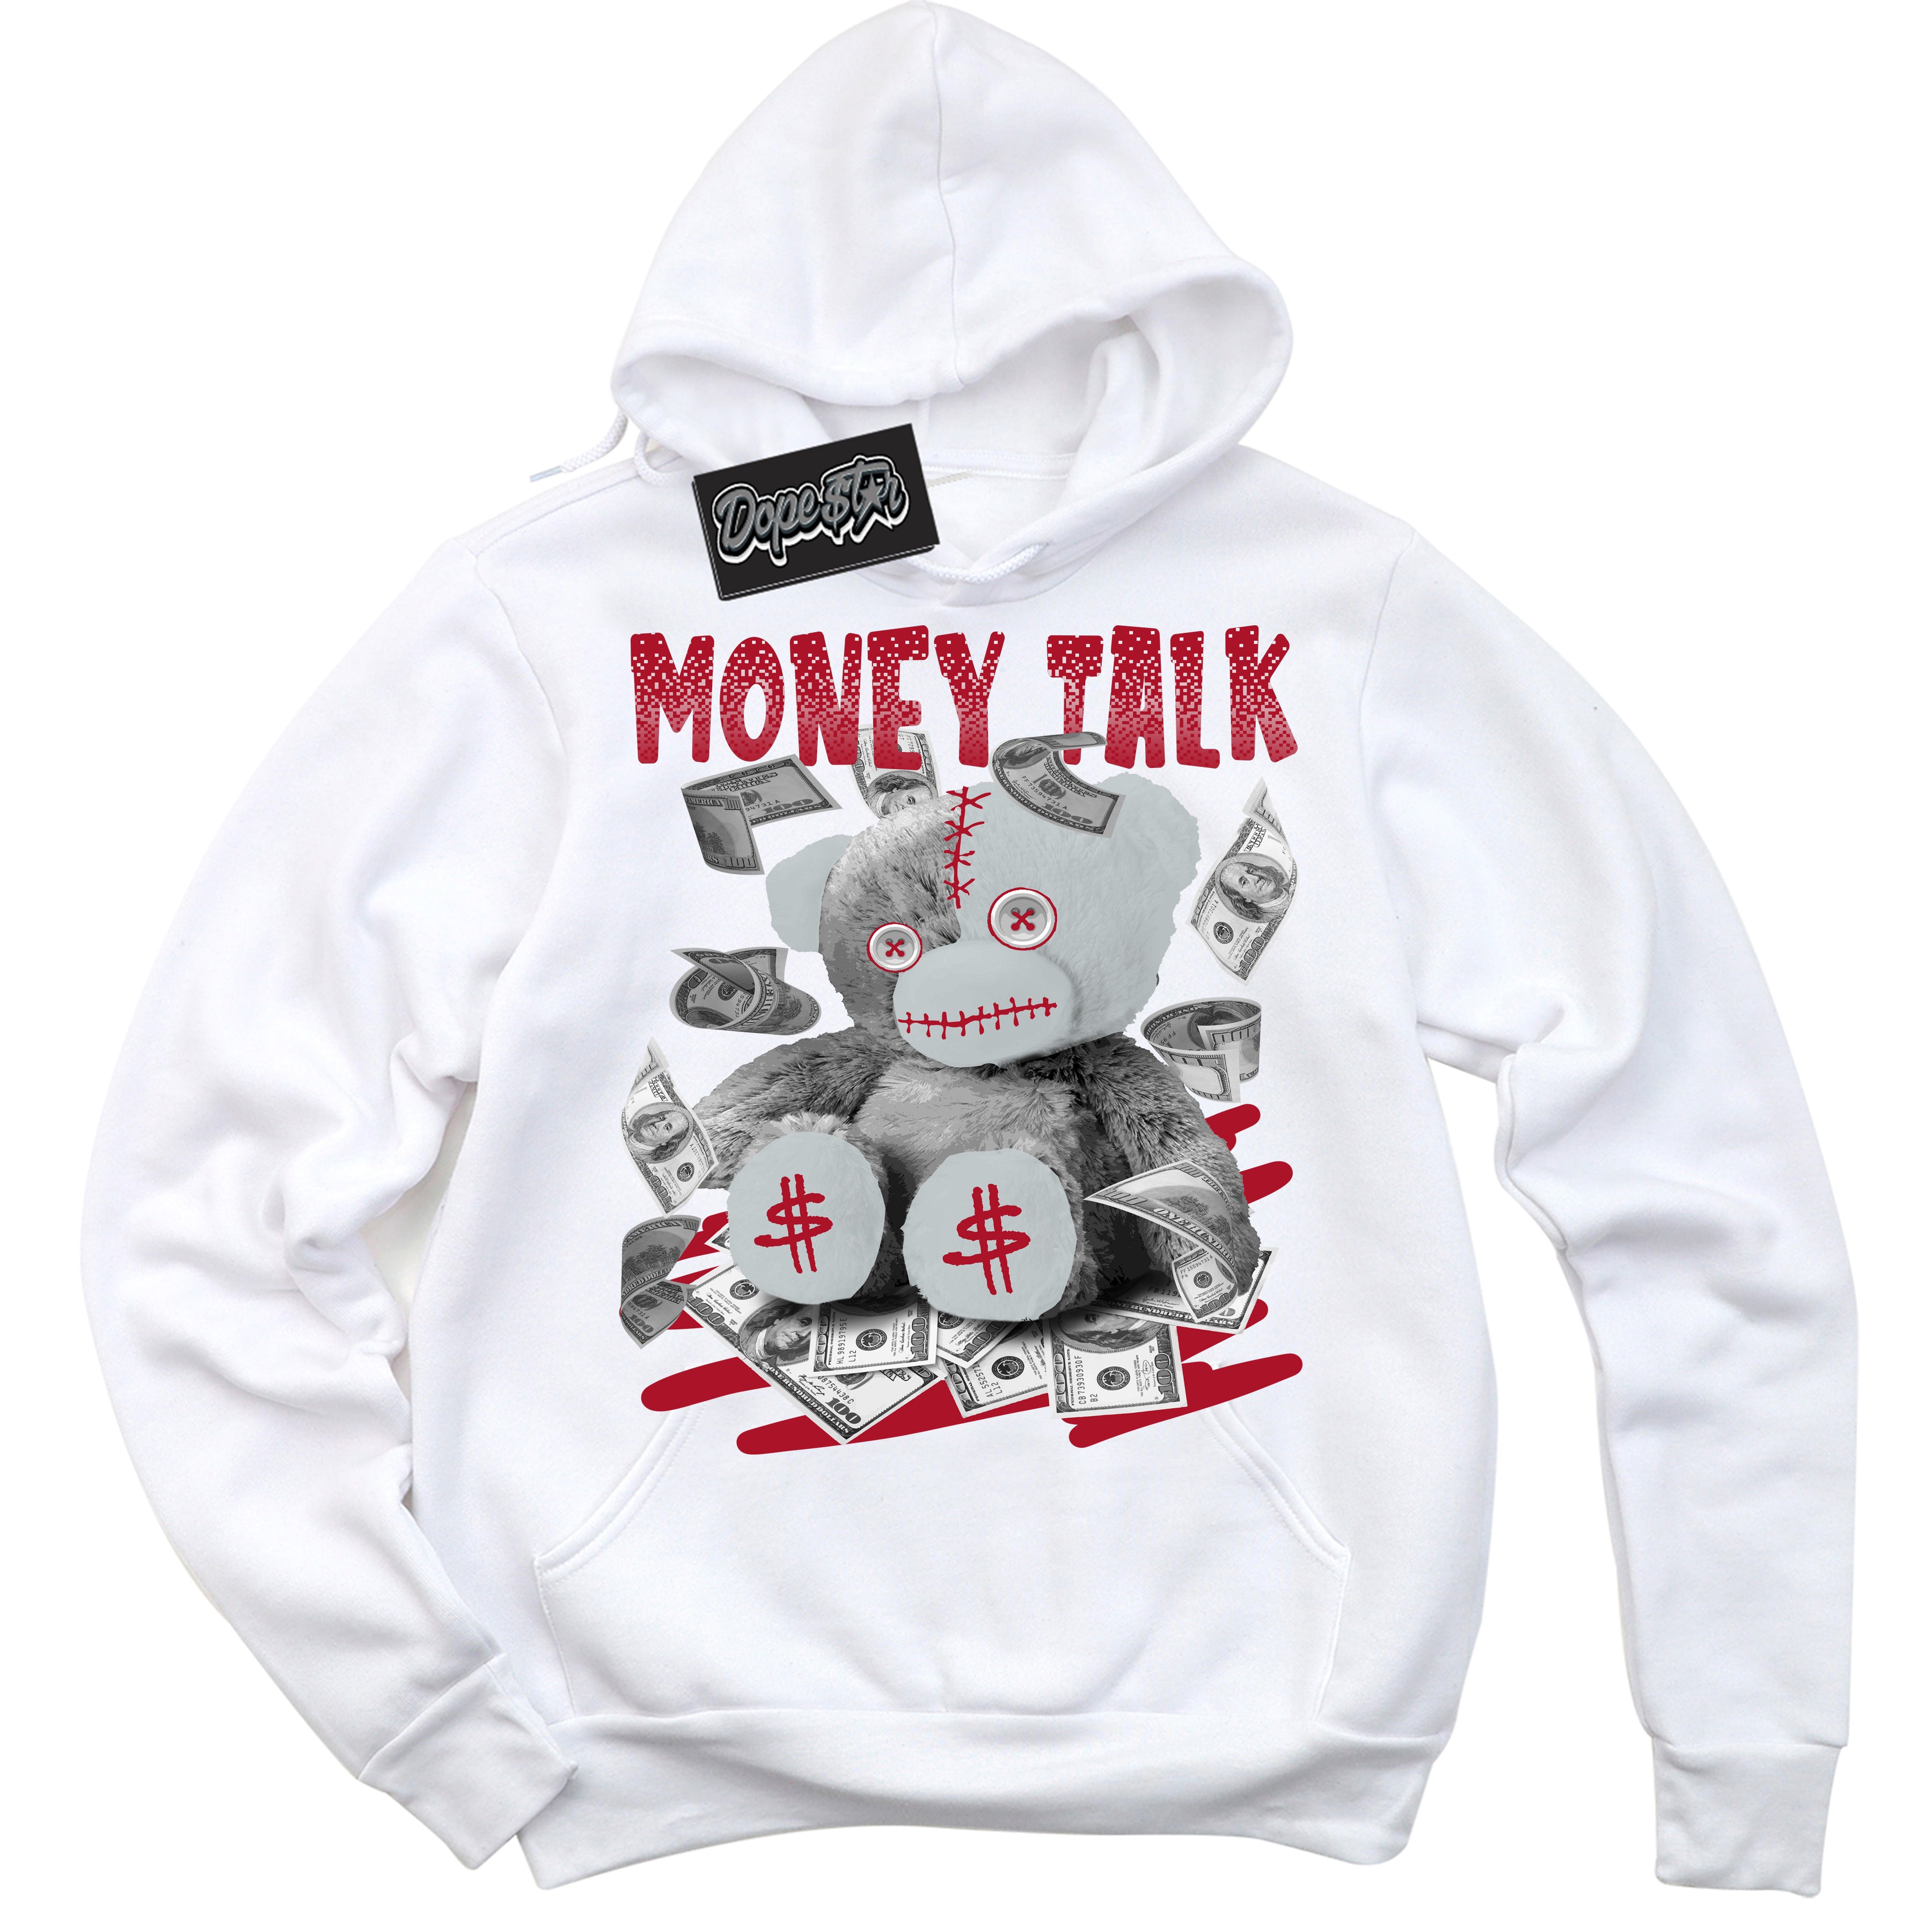 Cool Black Hoodie with “ Money Talk Bear ”  design that Perfectly Matches  Reverse Ultraman Sneakers.